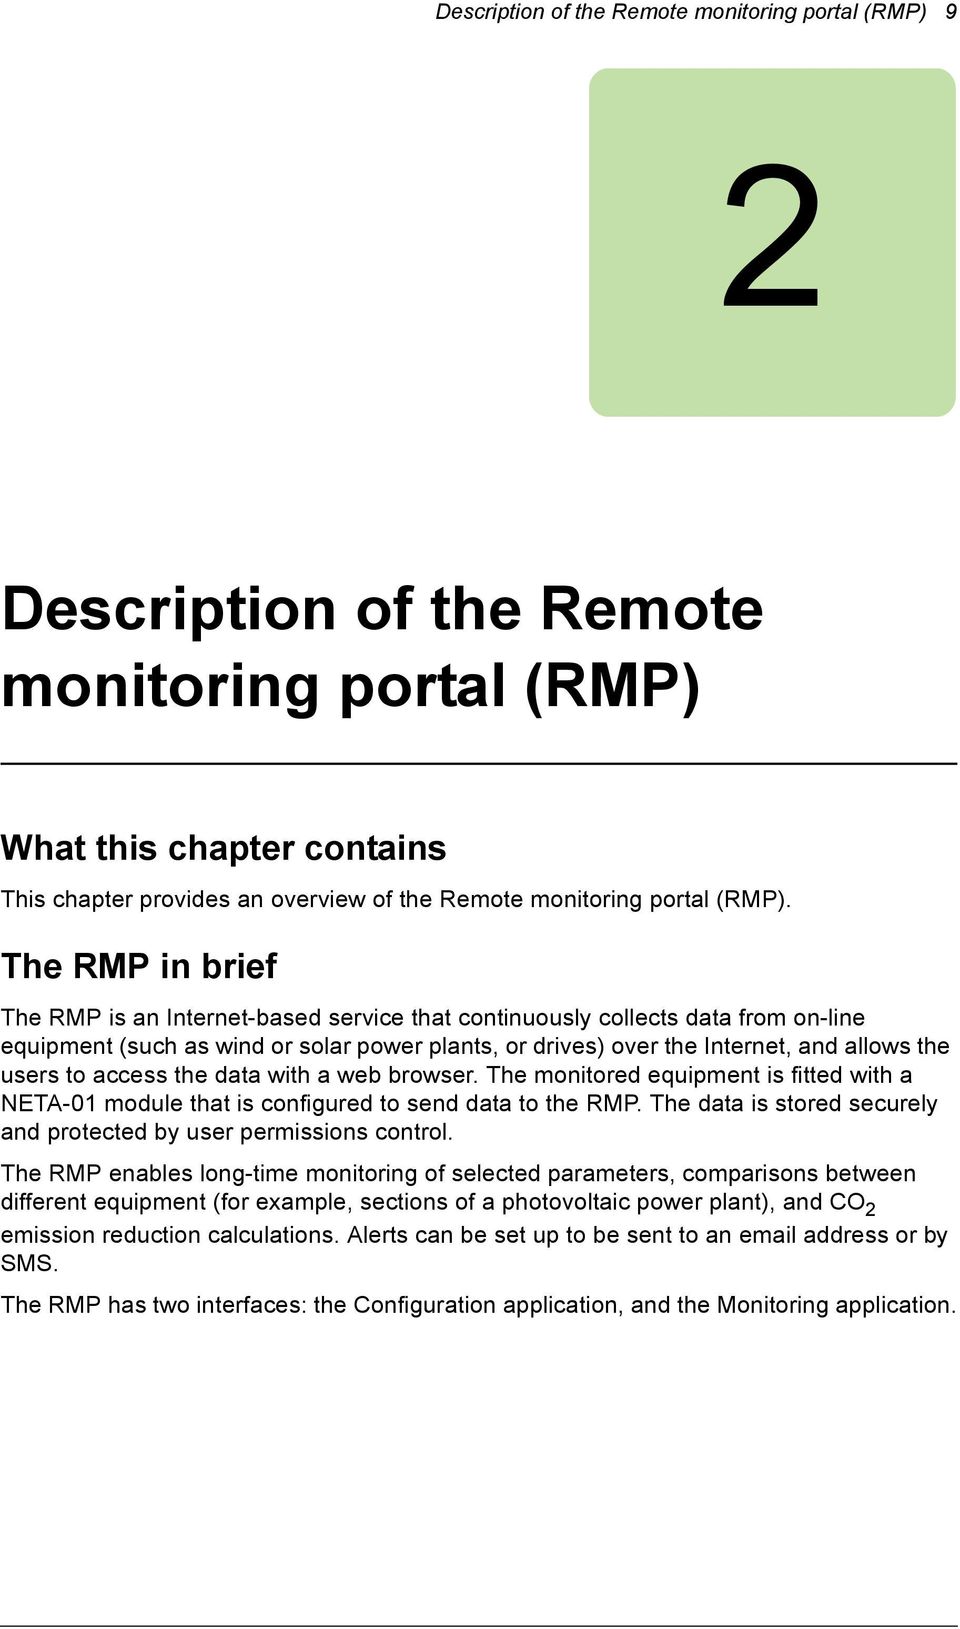 The RMP in brief The RMP is an Internet-based service that continuously collects data from on-line equipment (such as wind or solar power plants, or drives) over the Internet, and allows the users to